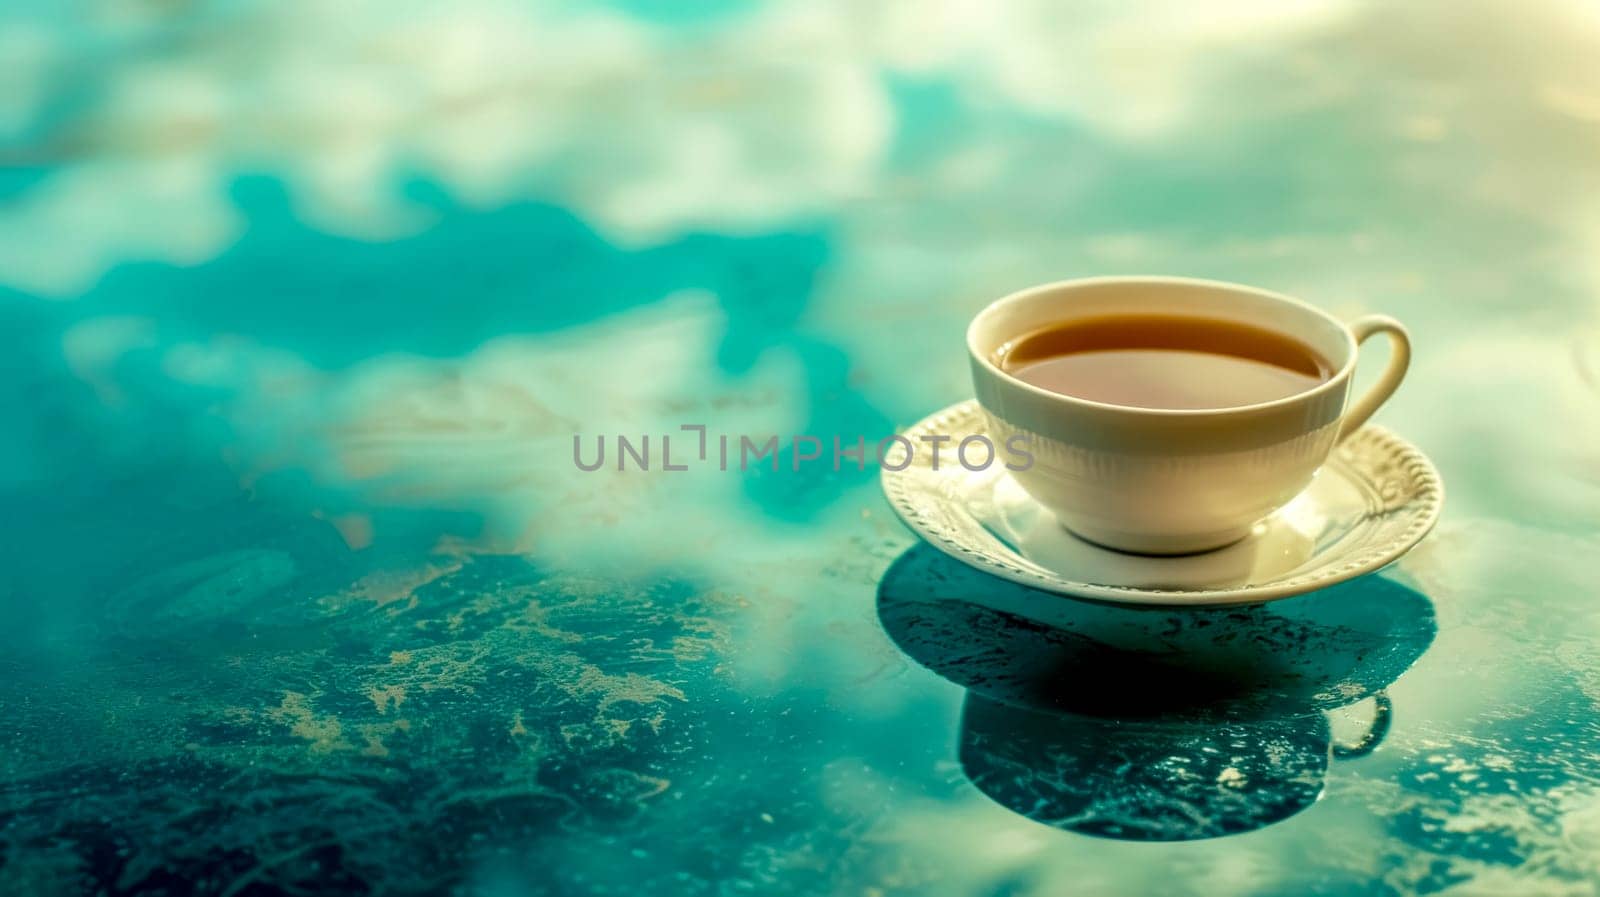 Serene tea time - cup on watery glass surface by Edophoto